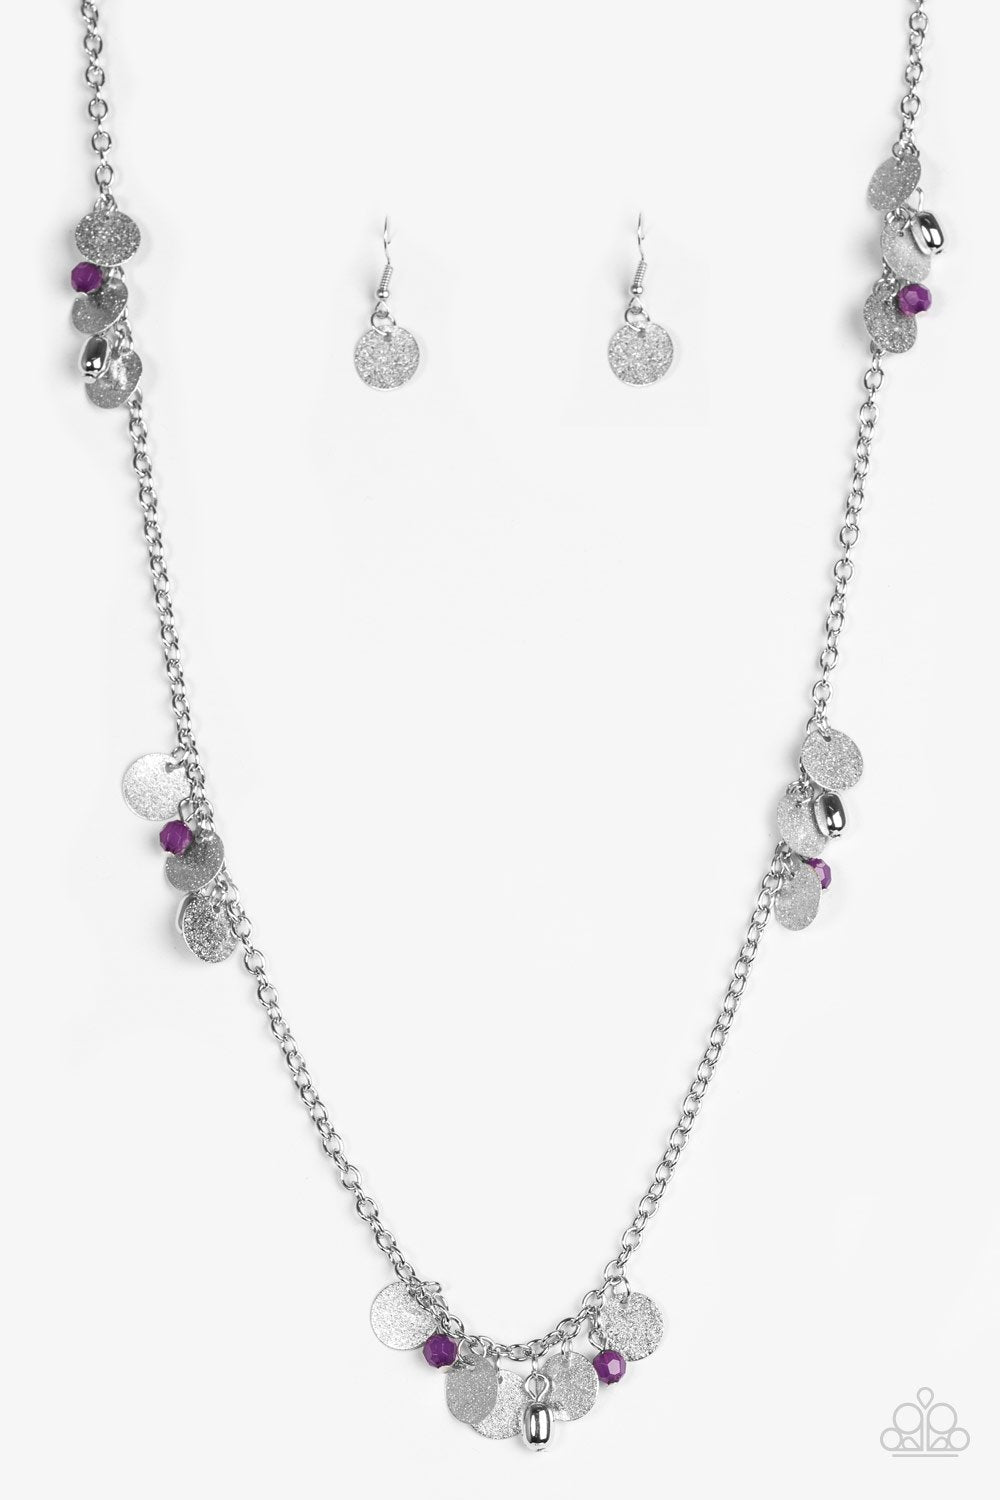 Musical Expression Silver and Purple Necklace - Paparazzi Accessories-CarasShop.com - $5 Jewelry by Cara Jewels